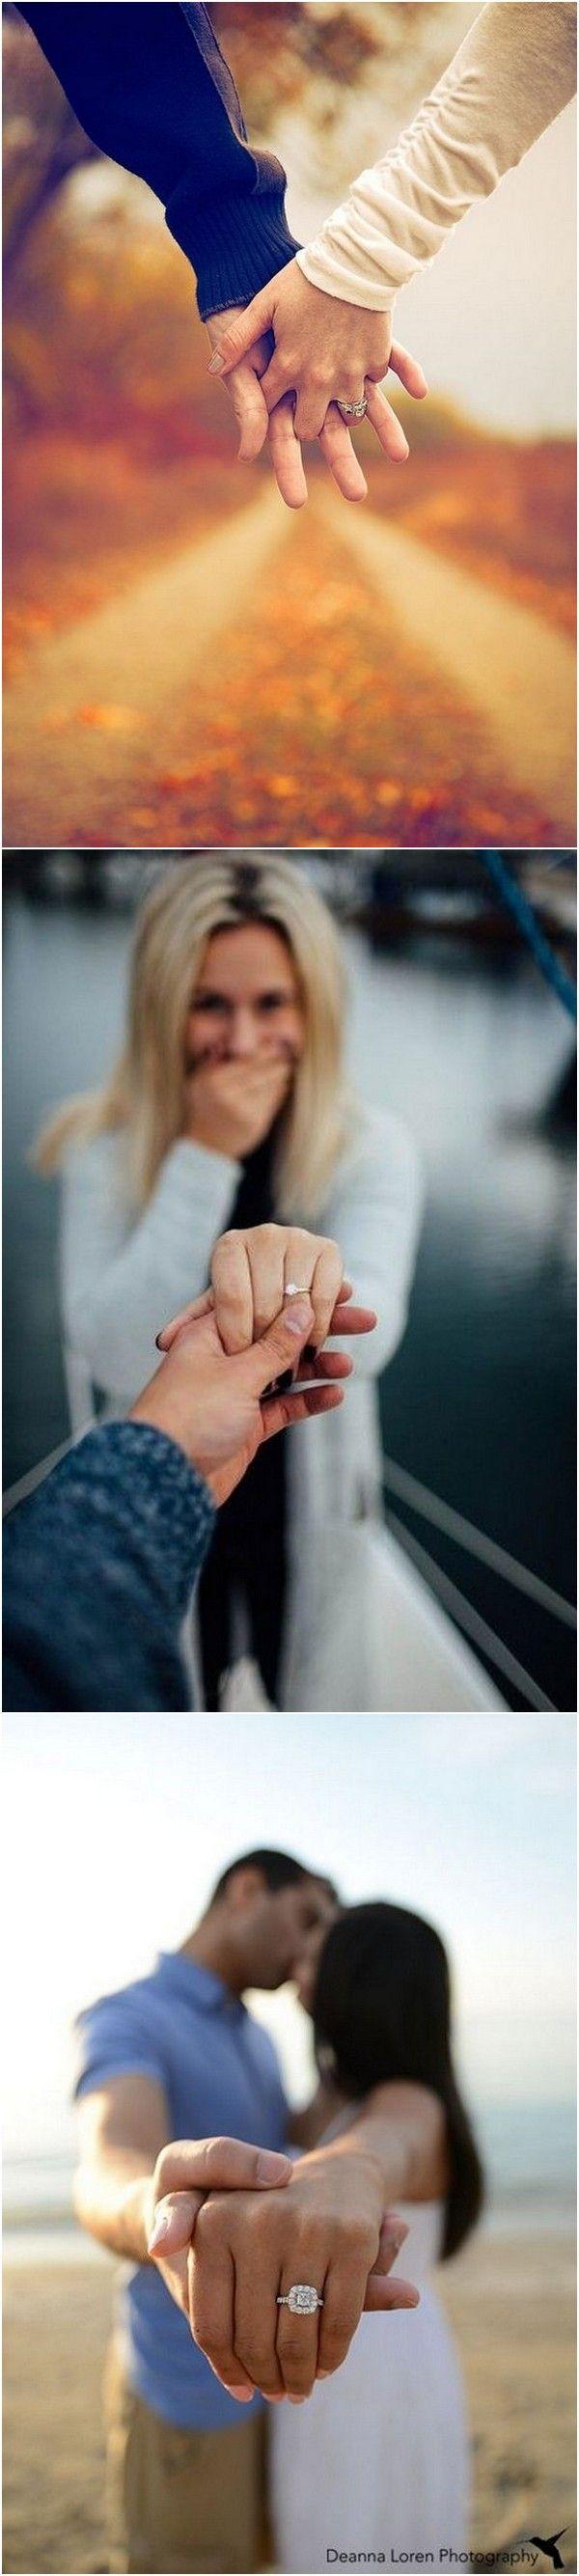 Свадьба - Top 20 Engagement Photo Ideas To Love - Page 2 Of 2